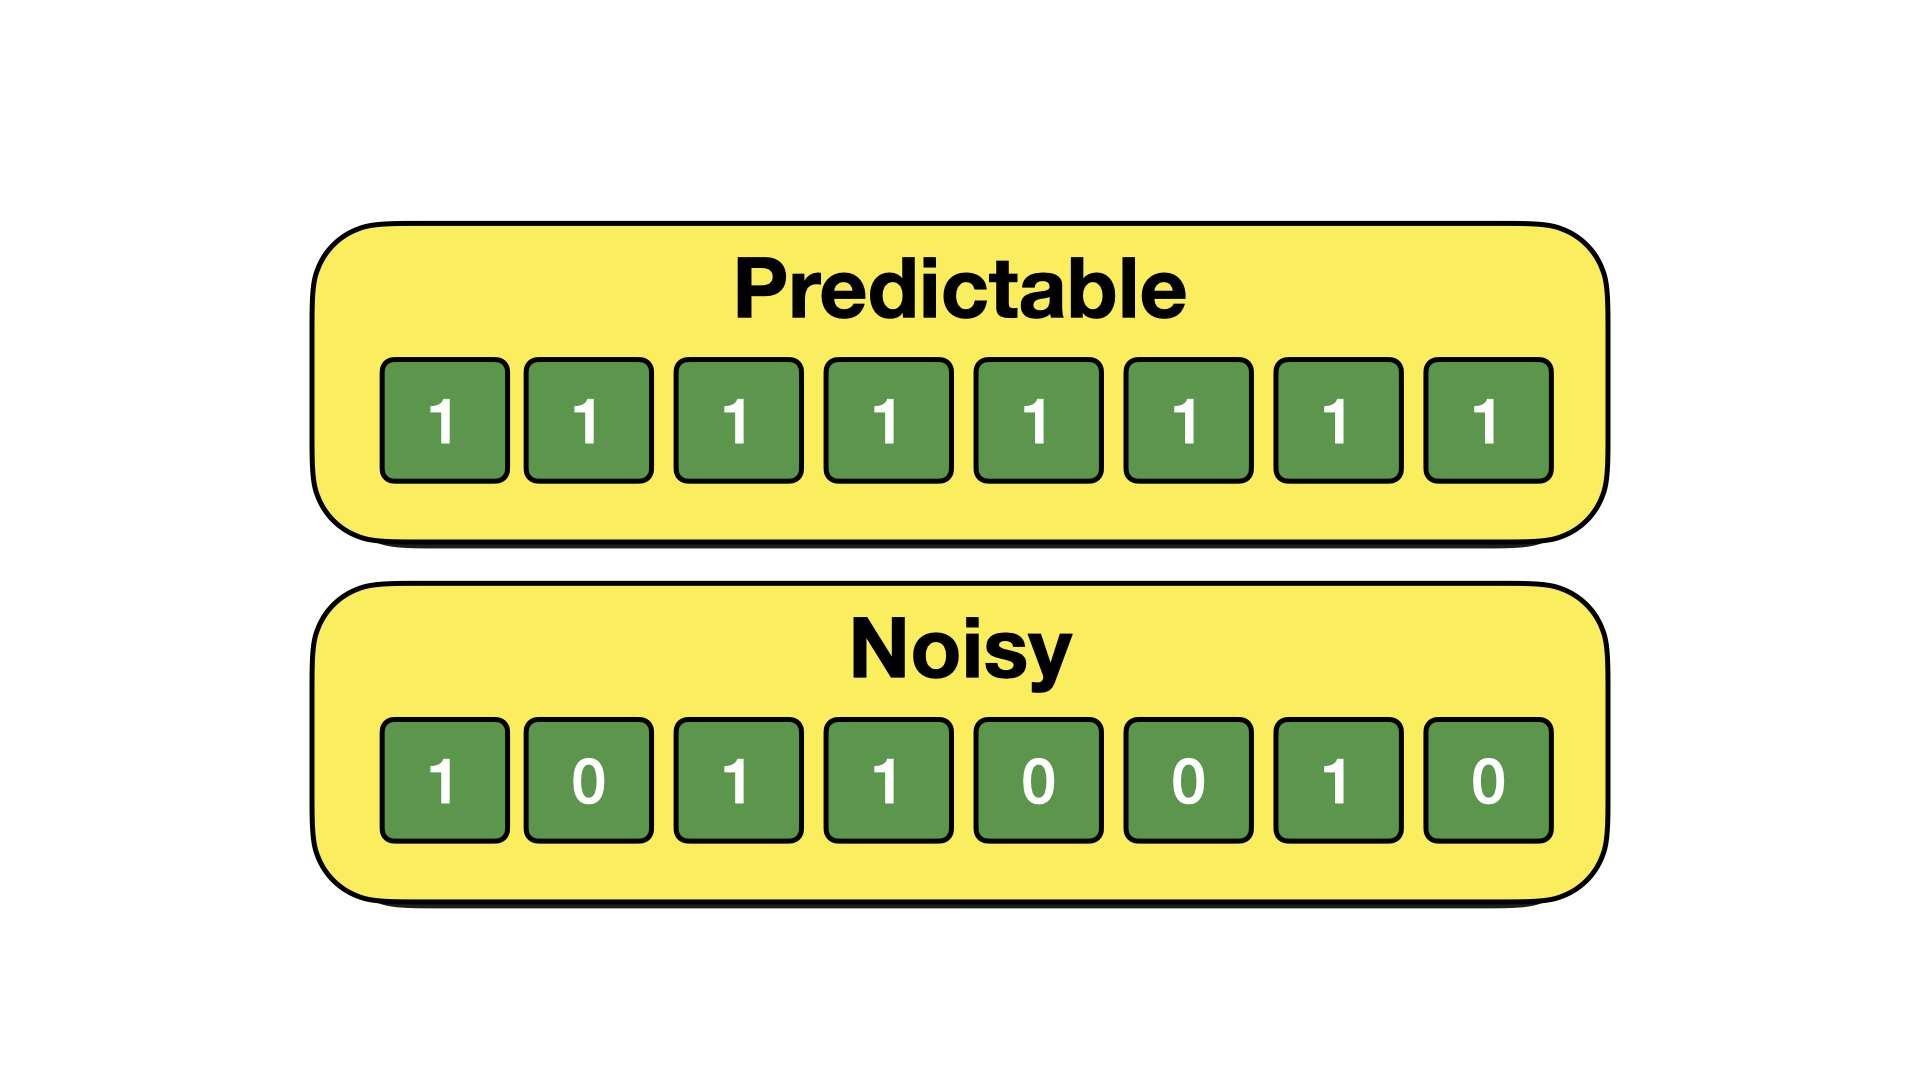 Example data set with predictable and noisy data